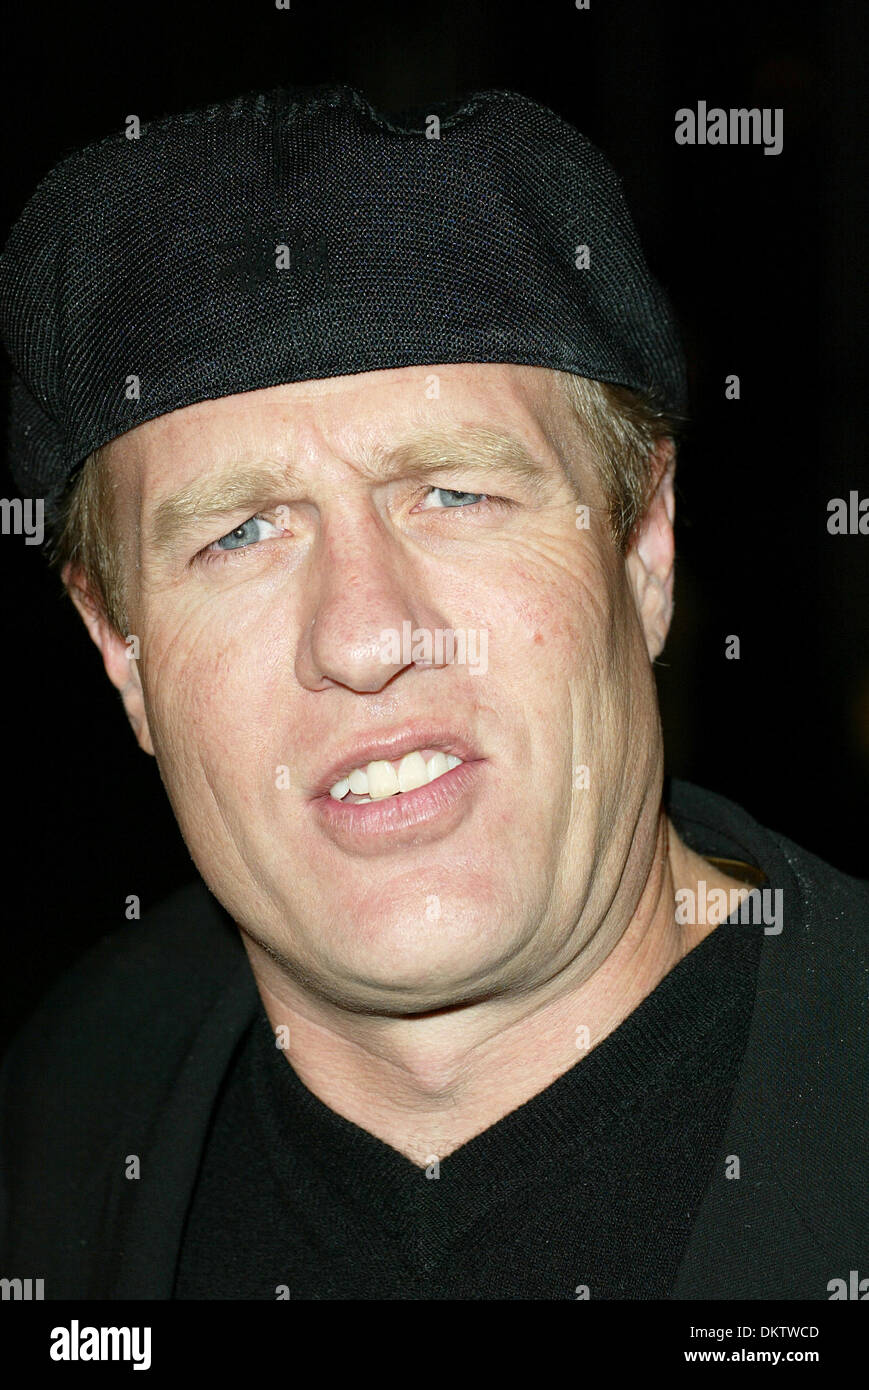 GREGG HENRY.ACTOR.ANGELES, USA.CINERAMA DOME, HOLLYWOOD, LOS.04/11/2002.LAC10592. Stock Photo